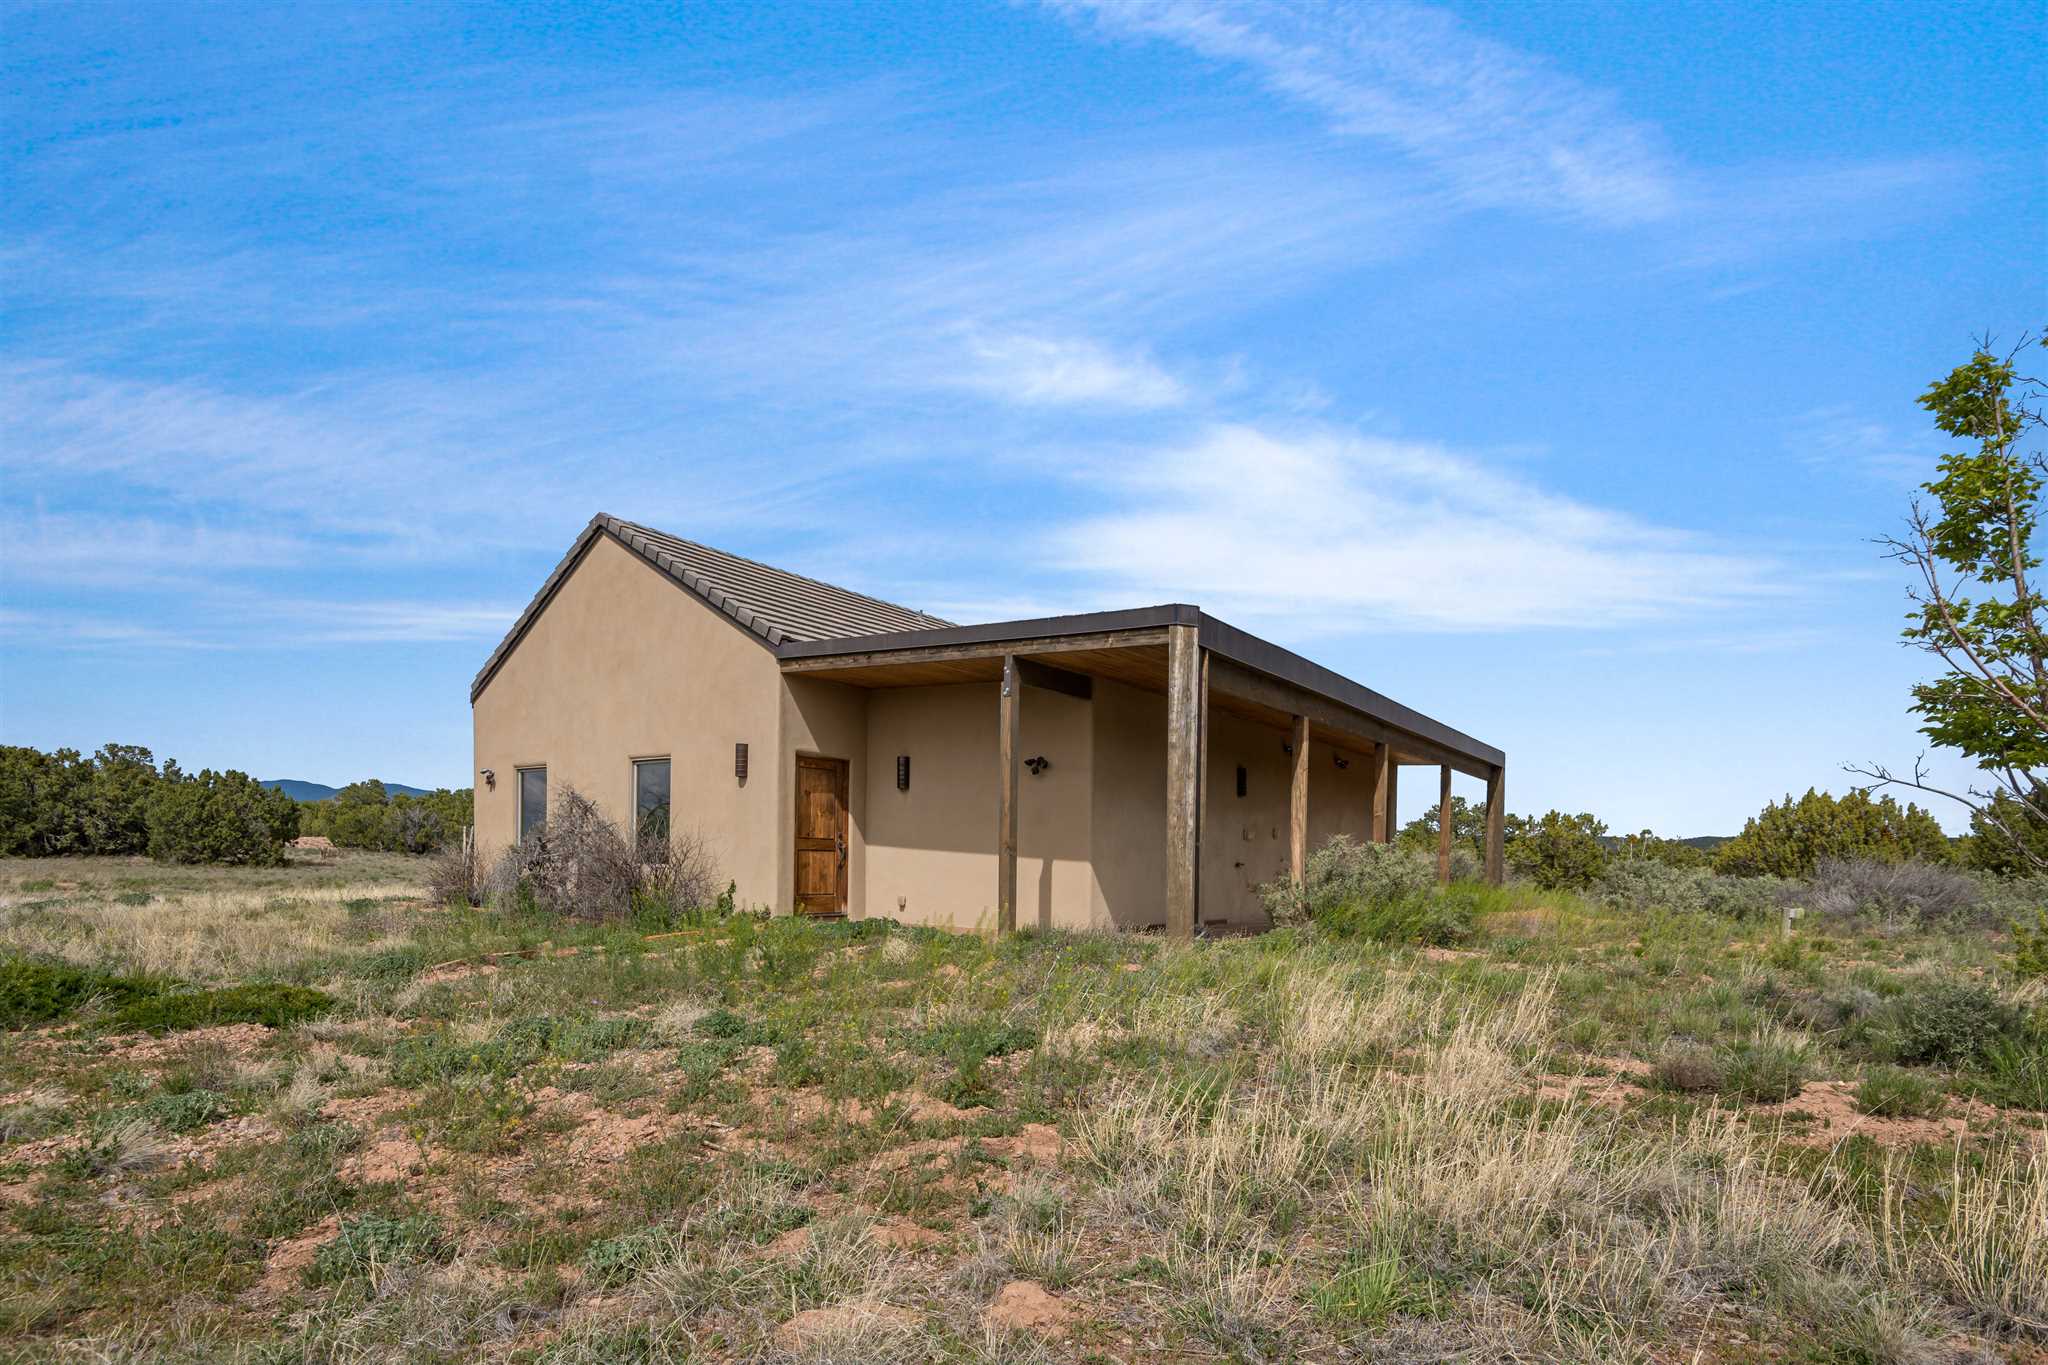 46 & 50 Cattle, Lamy, New Mexico 87540, 5 Bedrooms Bedrooms, ,7 BathroomsBathrooms,Residential,For Sale,46 & 50 Cattle,201902026